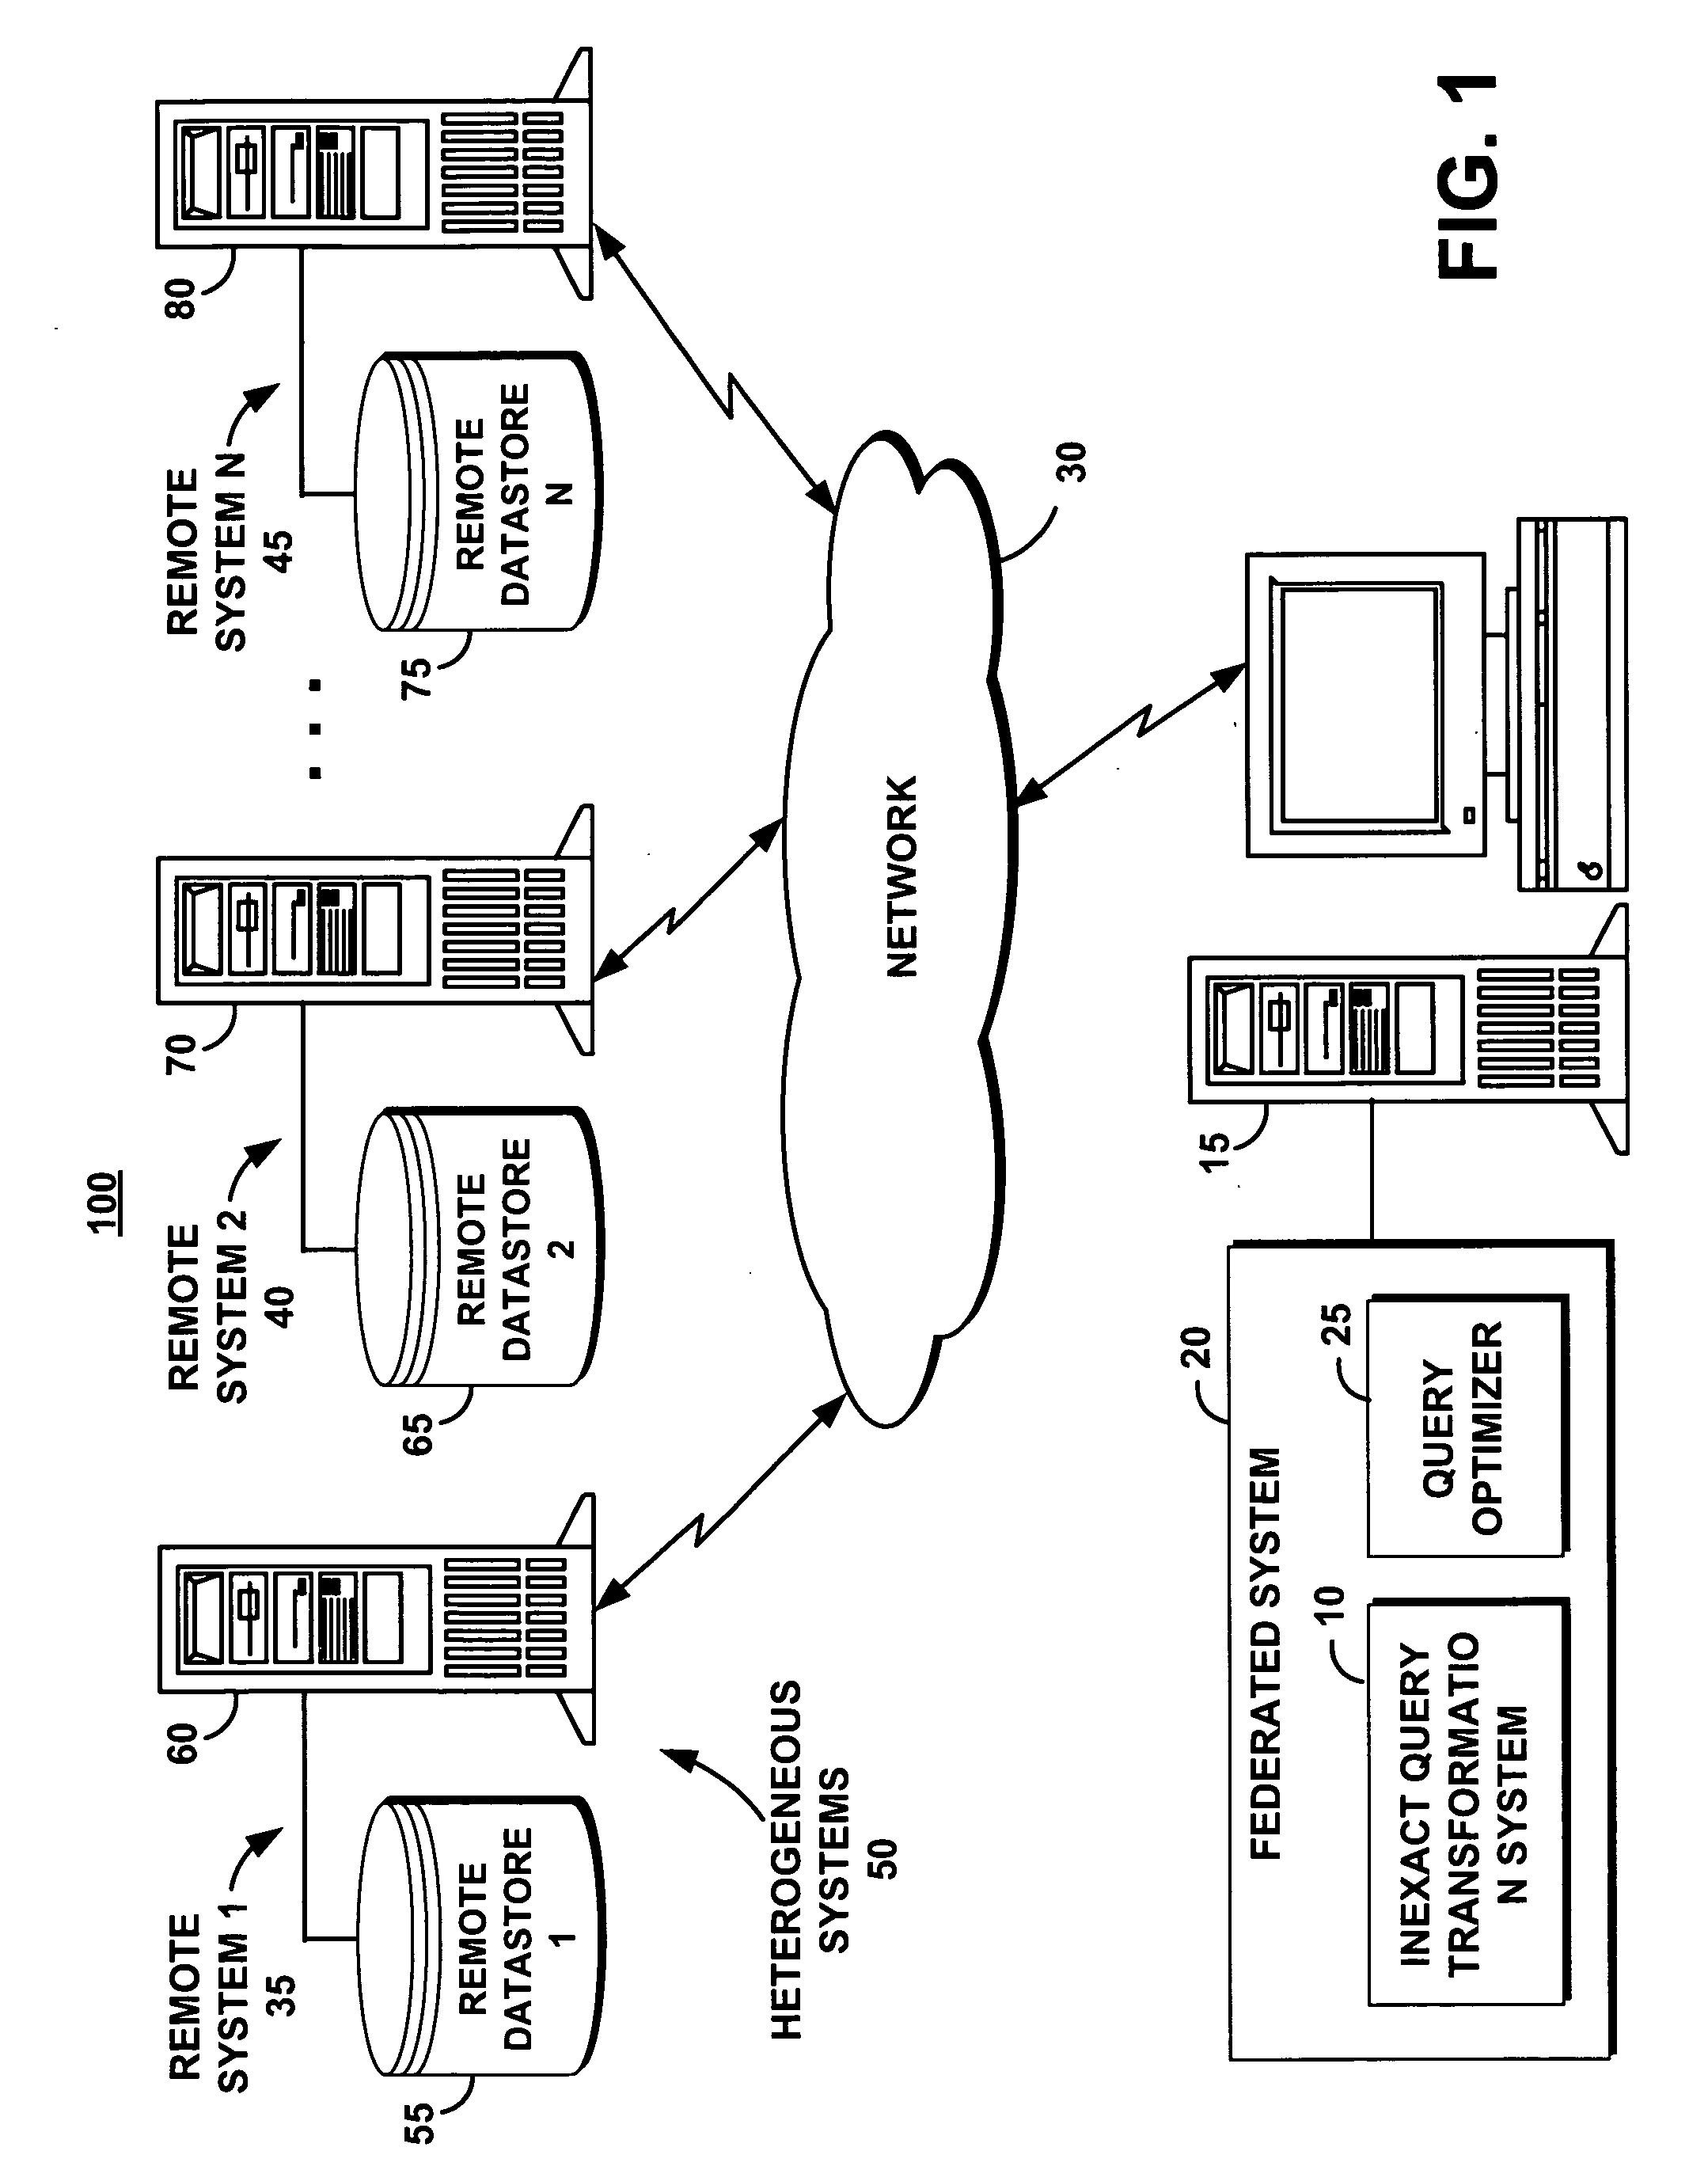 System and method for performing an inexact query transformation in a heterogeneous environment